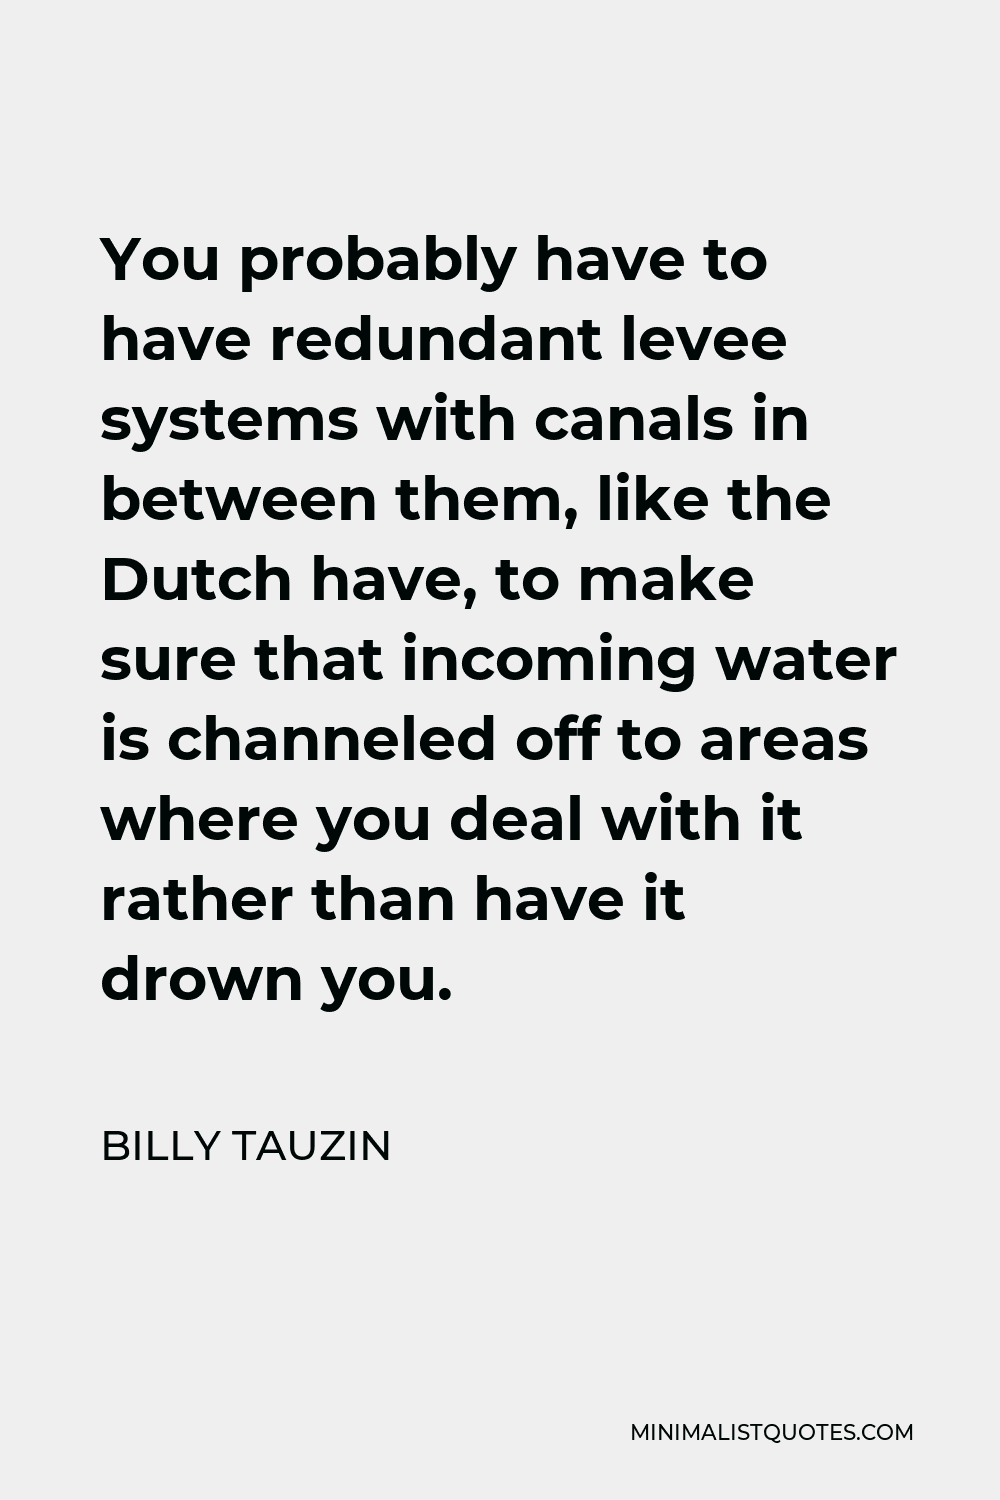 Billy Tauzin Quote - You probably have to have redundant levee systems with canals in between them, like the Dutch have, to make sure that incoming water is channeled off to areas where you deal with it rather than have it drown you.